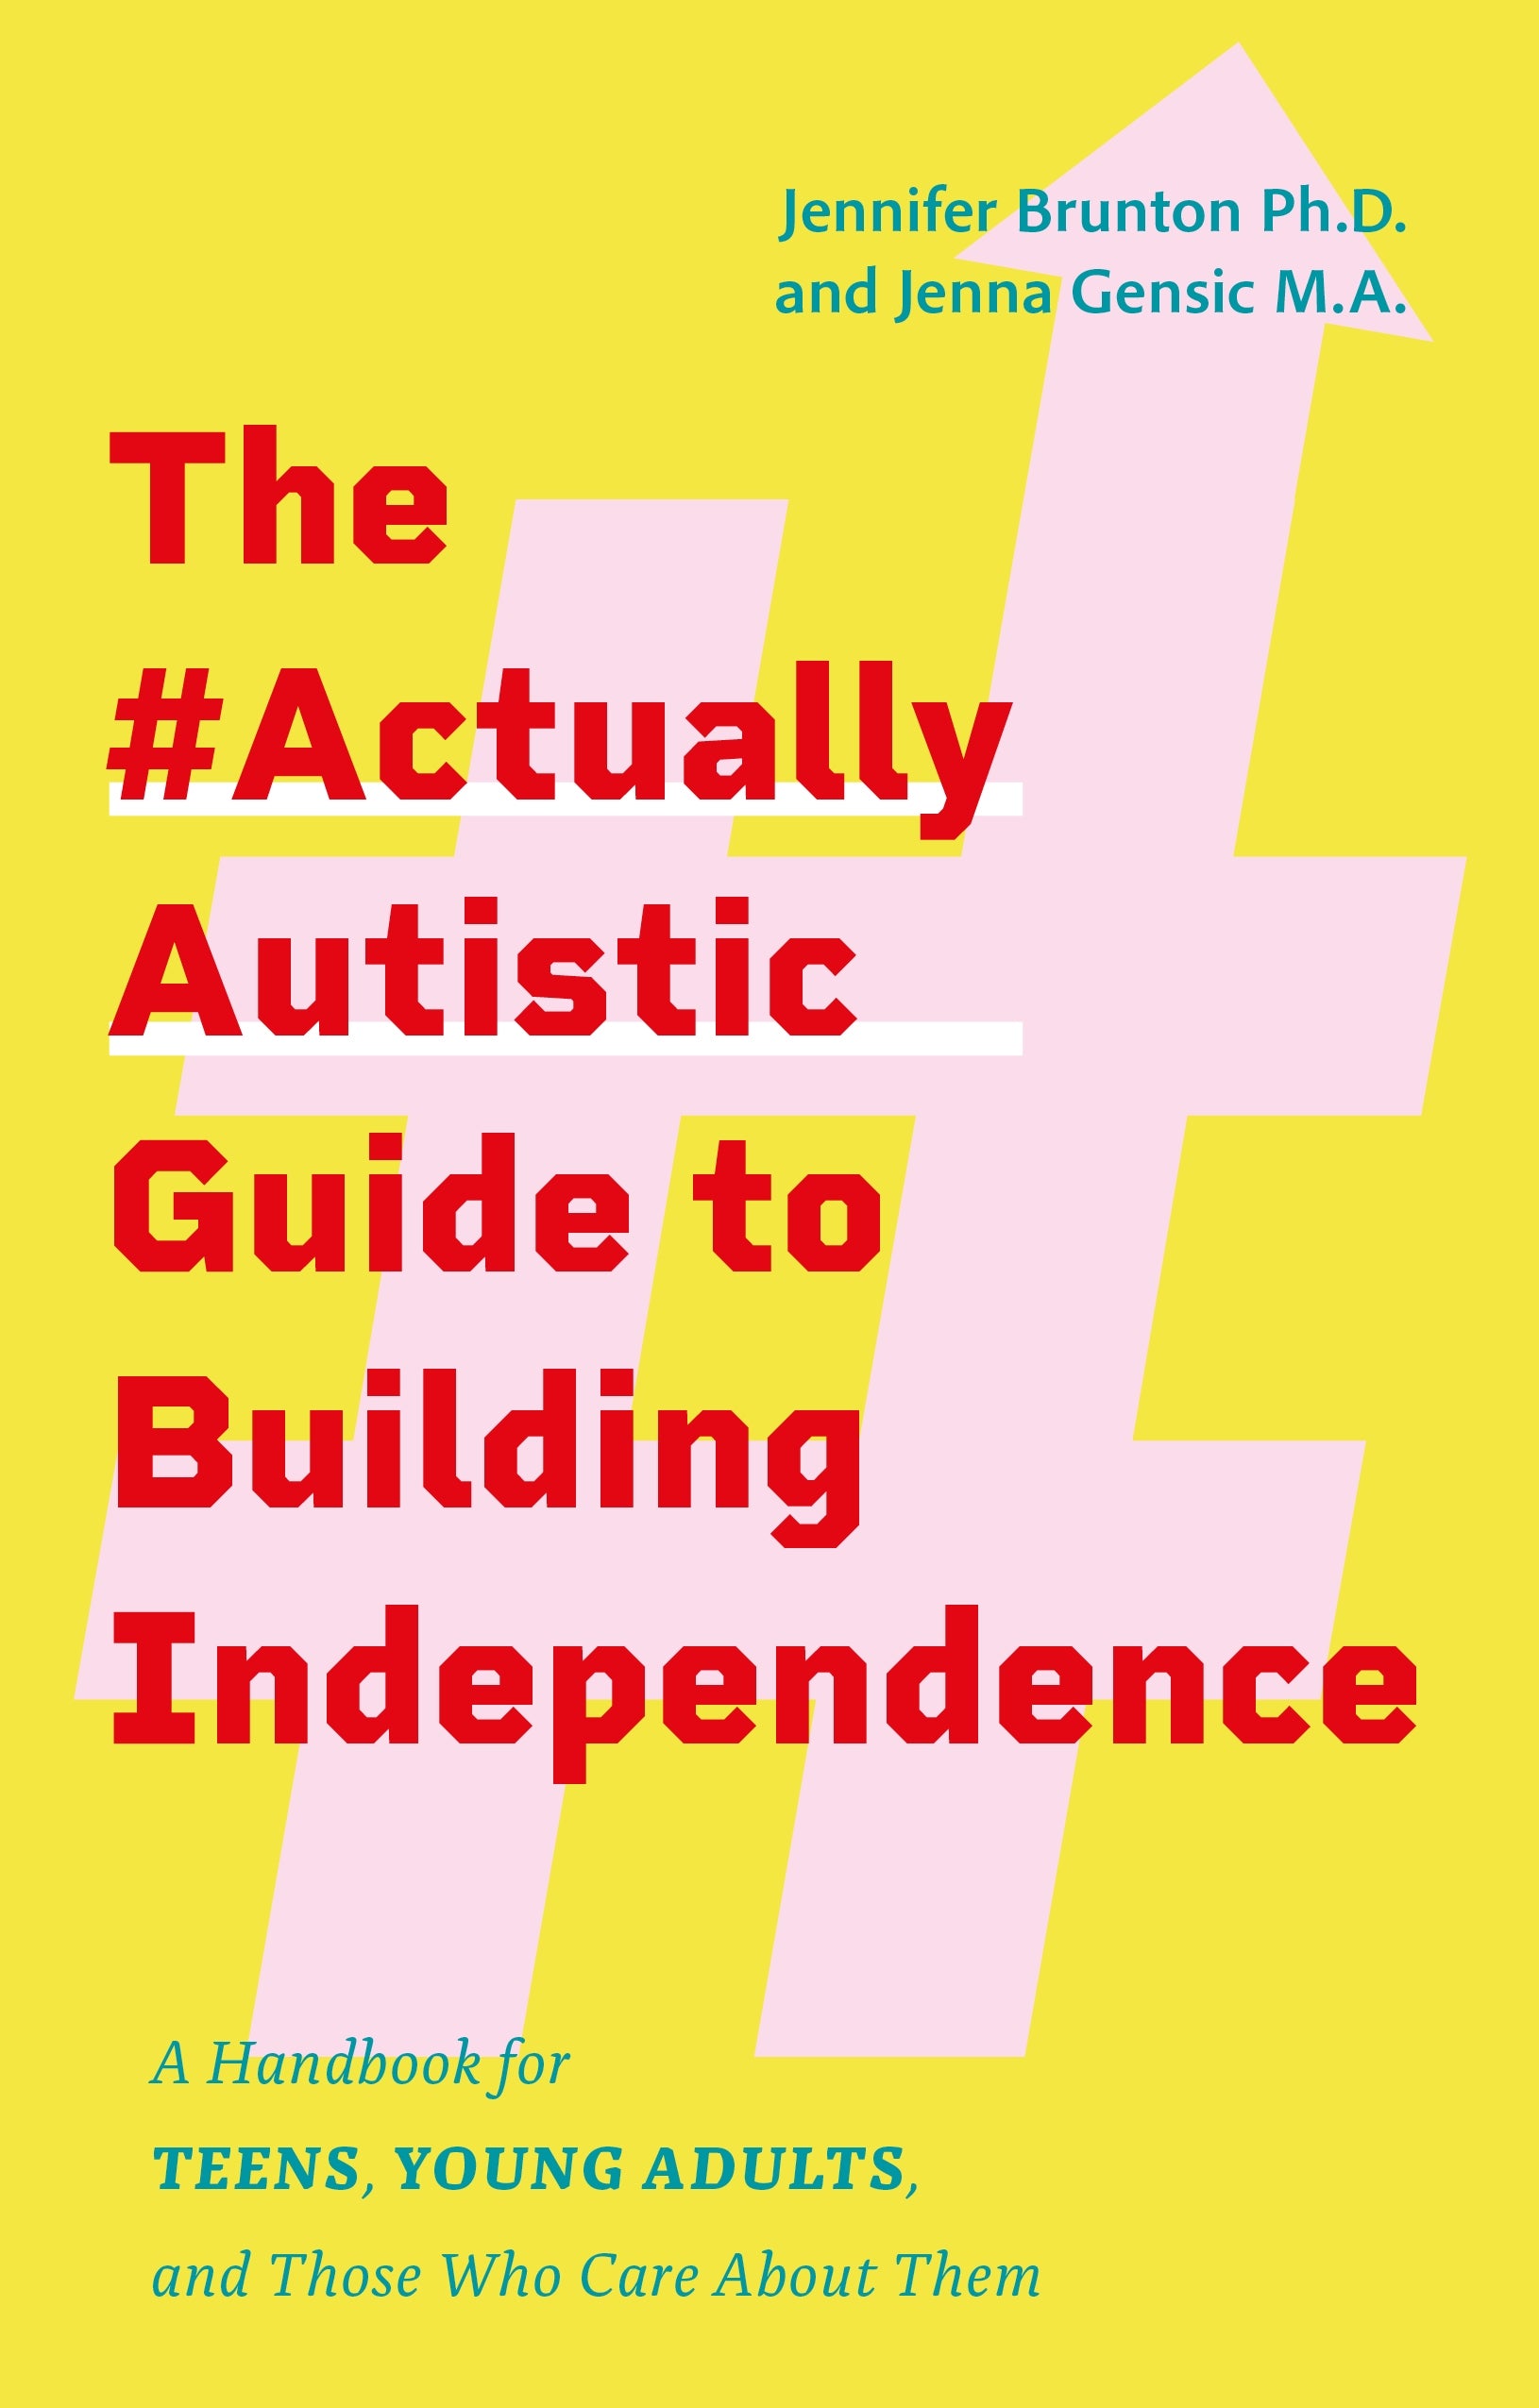 The #ActuallyAutistic Guide to Building Independence by Jennifer Brunton, Jenna Gensic